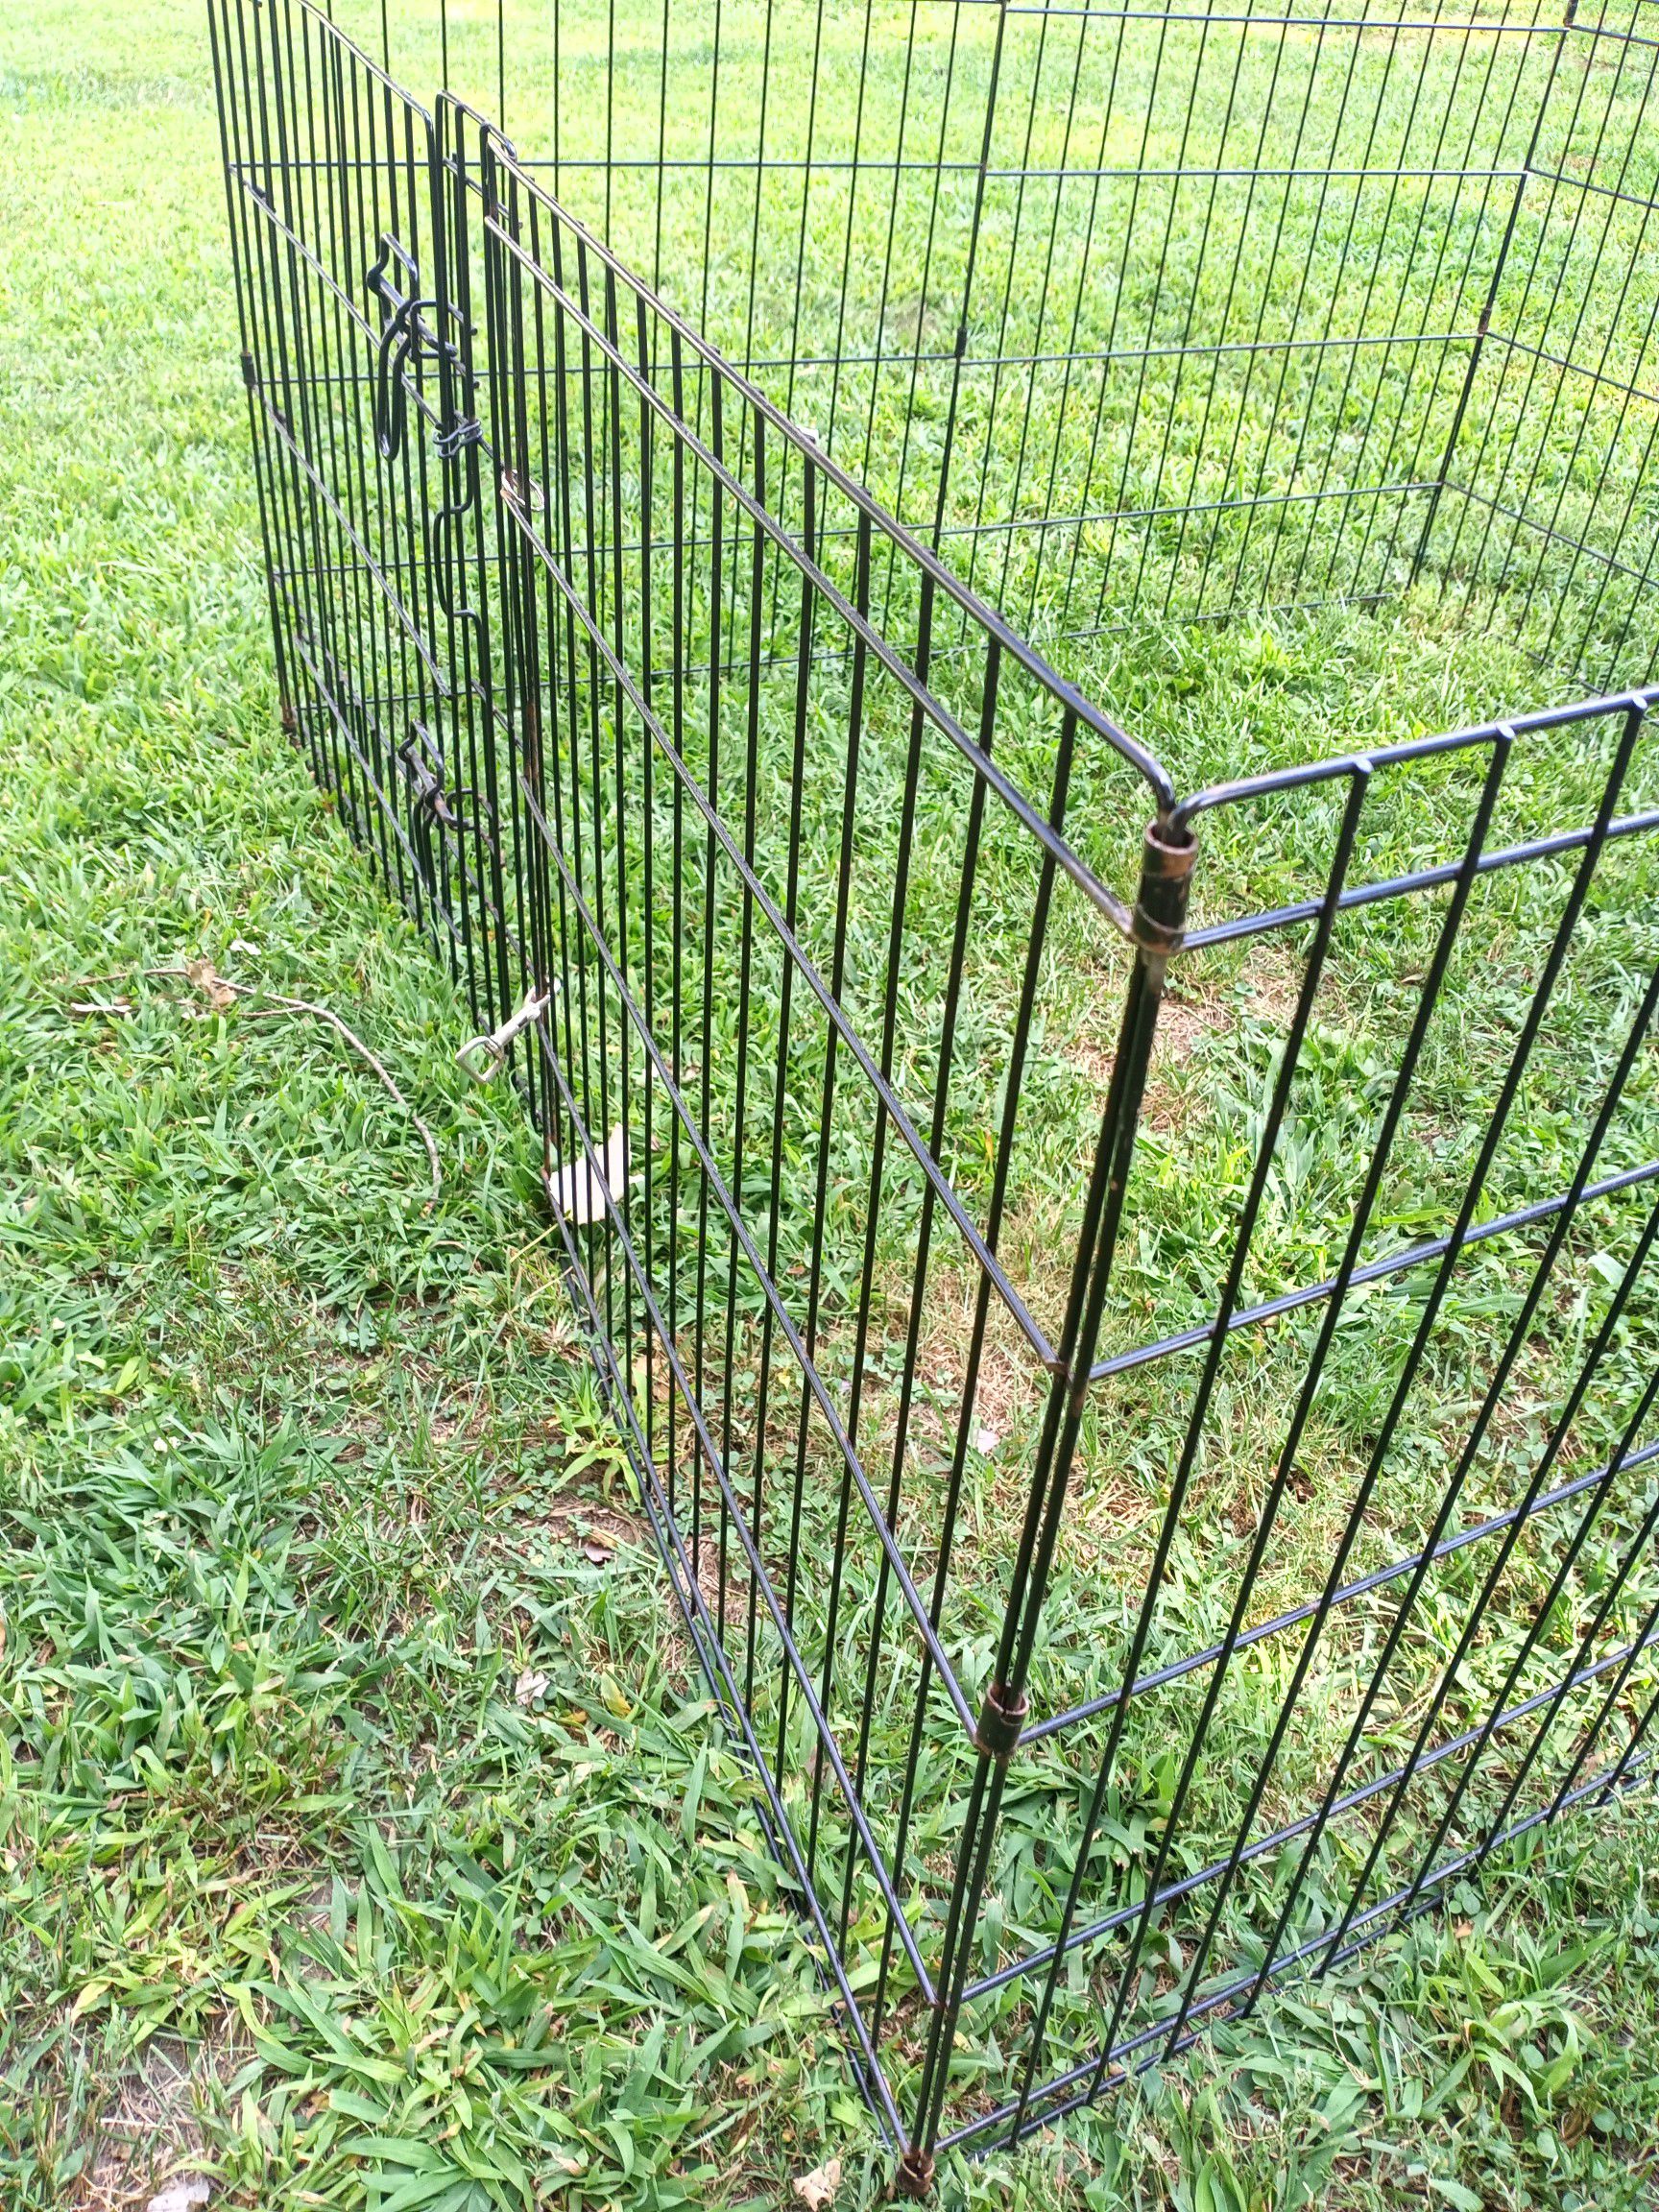 4ft by 4ft by 2 ft tall Dog Pen / Cage